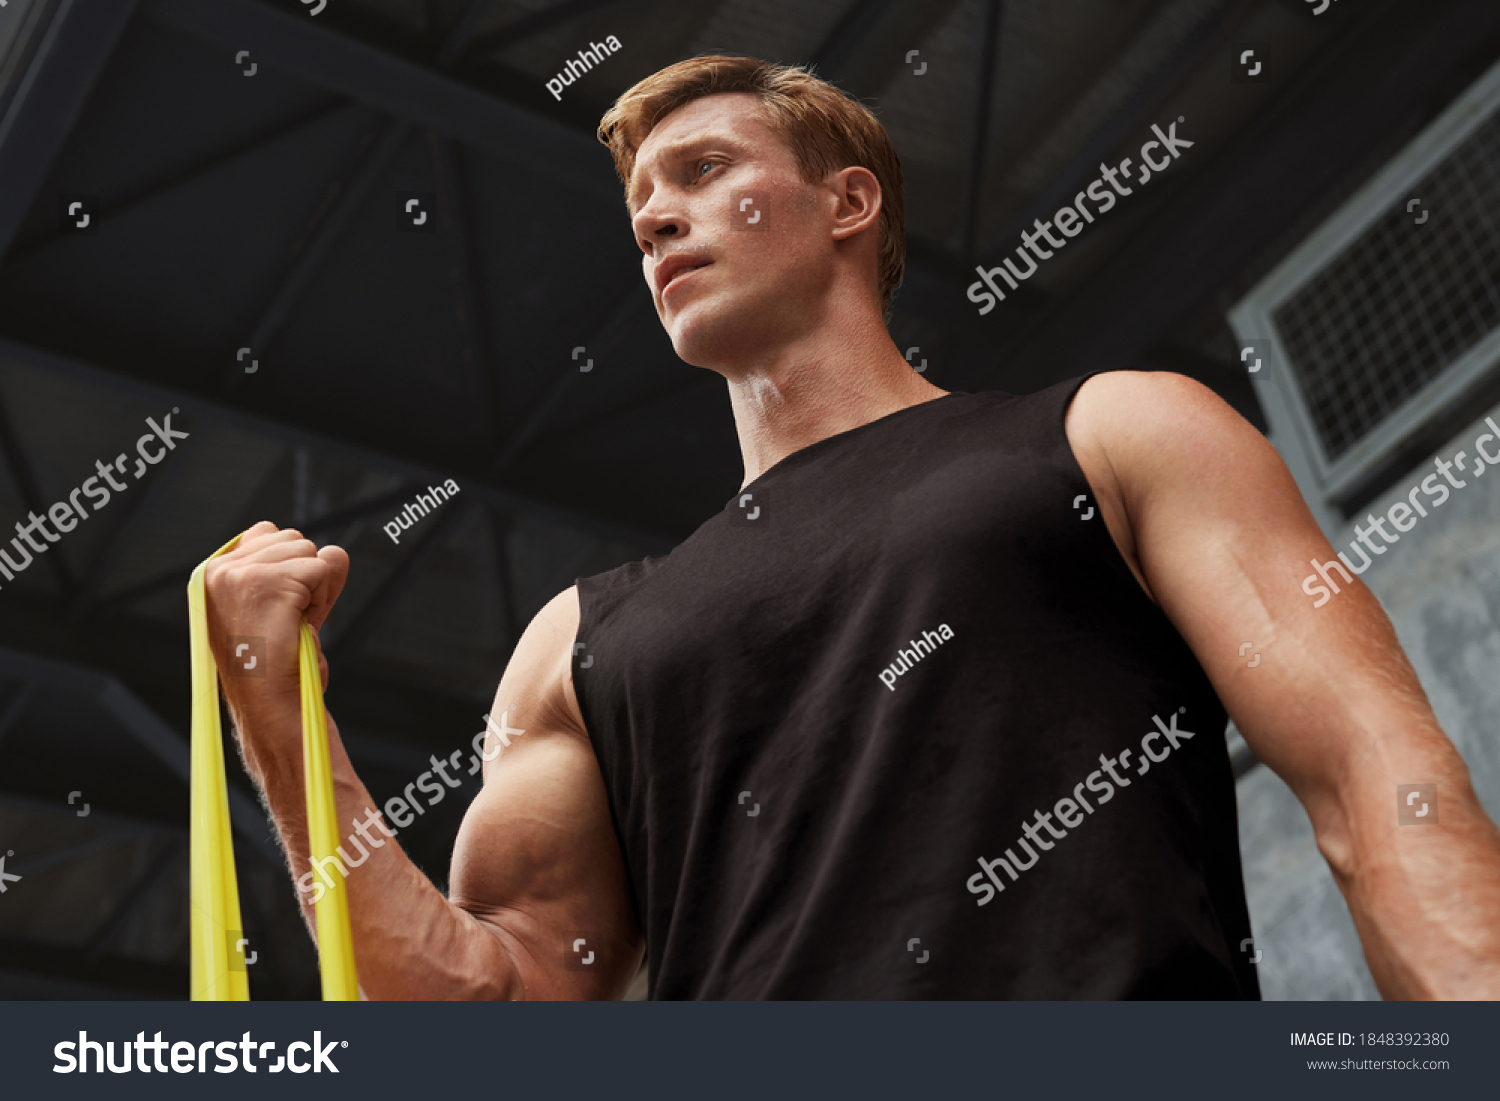 Young Man Stretching With Resistance Band Against Concrete Wall Outdoors. Handsome Caucasian Sportsman With Strong Muscular Body In Fashion Sportswear Doing Stretch Workout. #1848392380